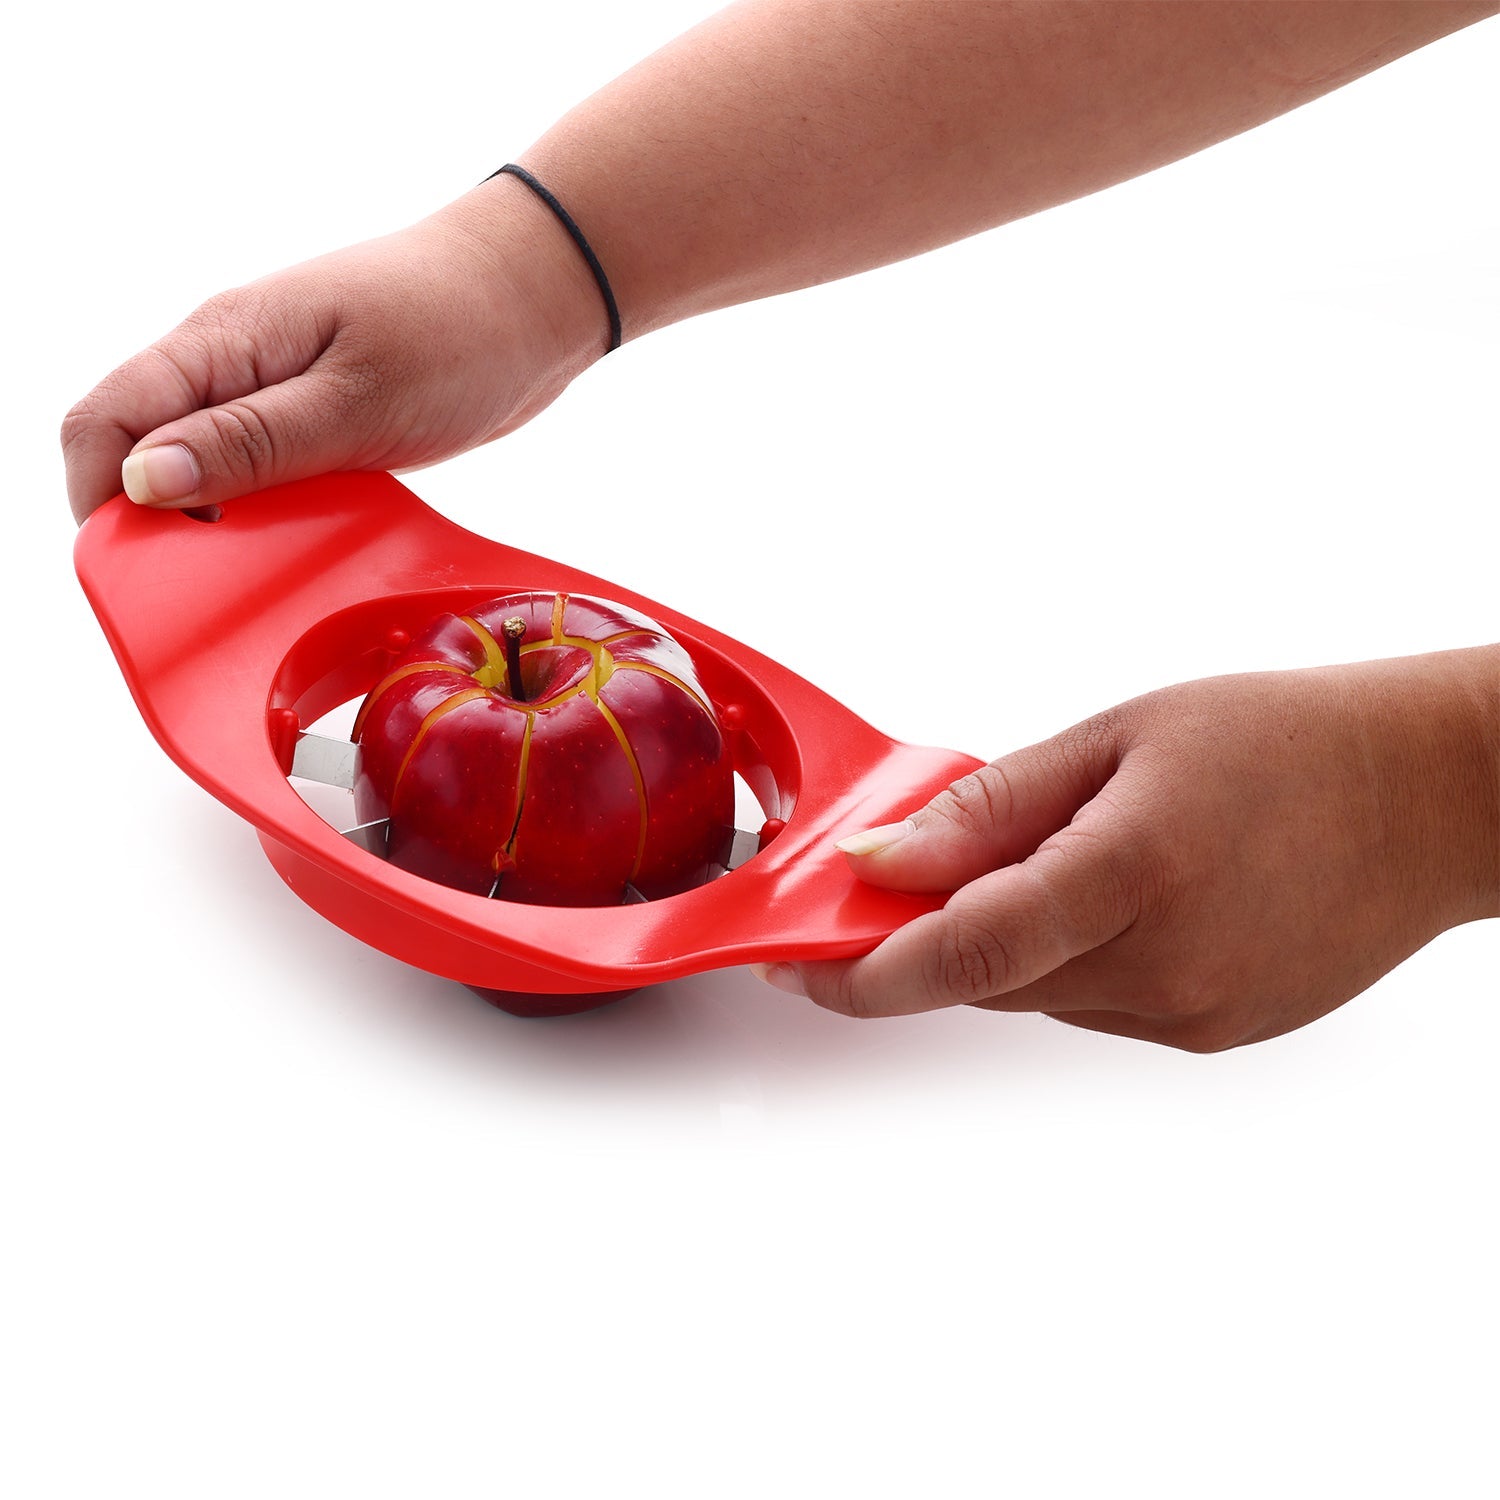 8124 Ganesh Plastic & Stainless Steel Apple cutter  (colors may vary) DeoDap